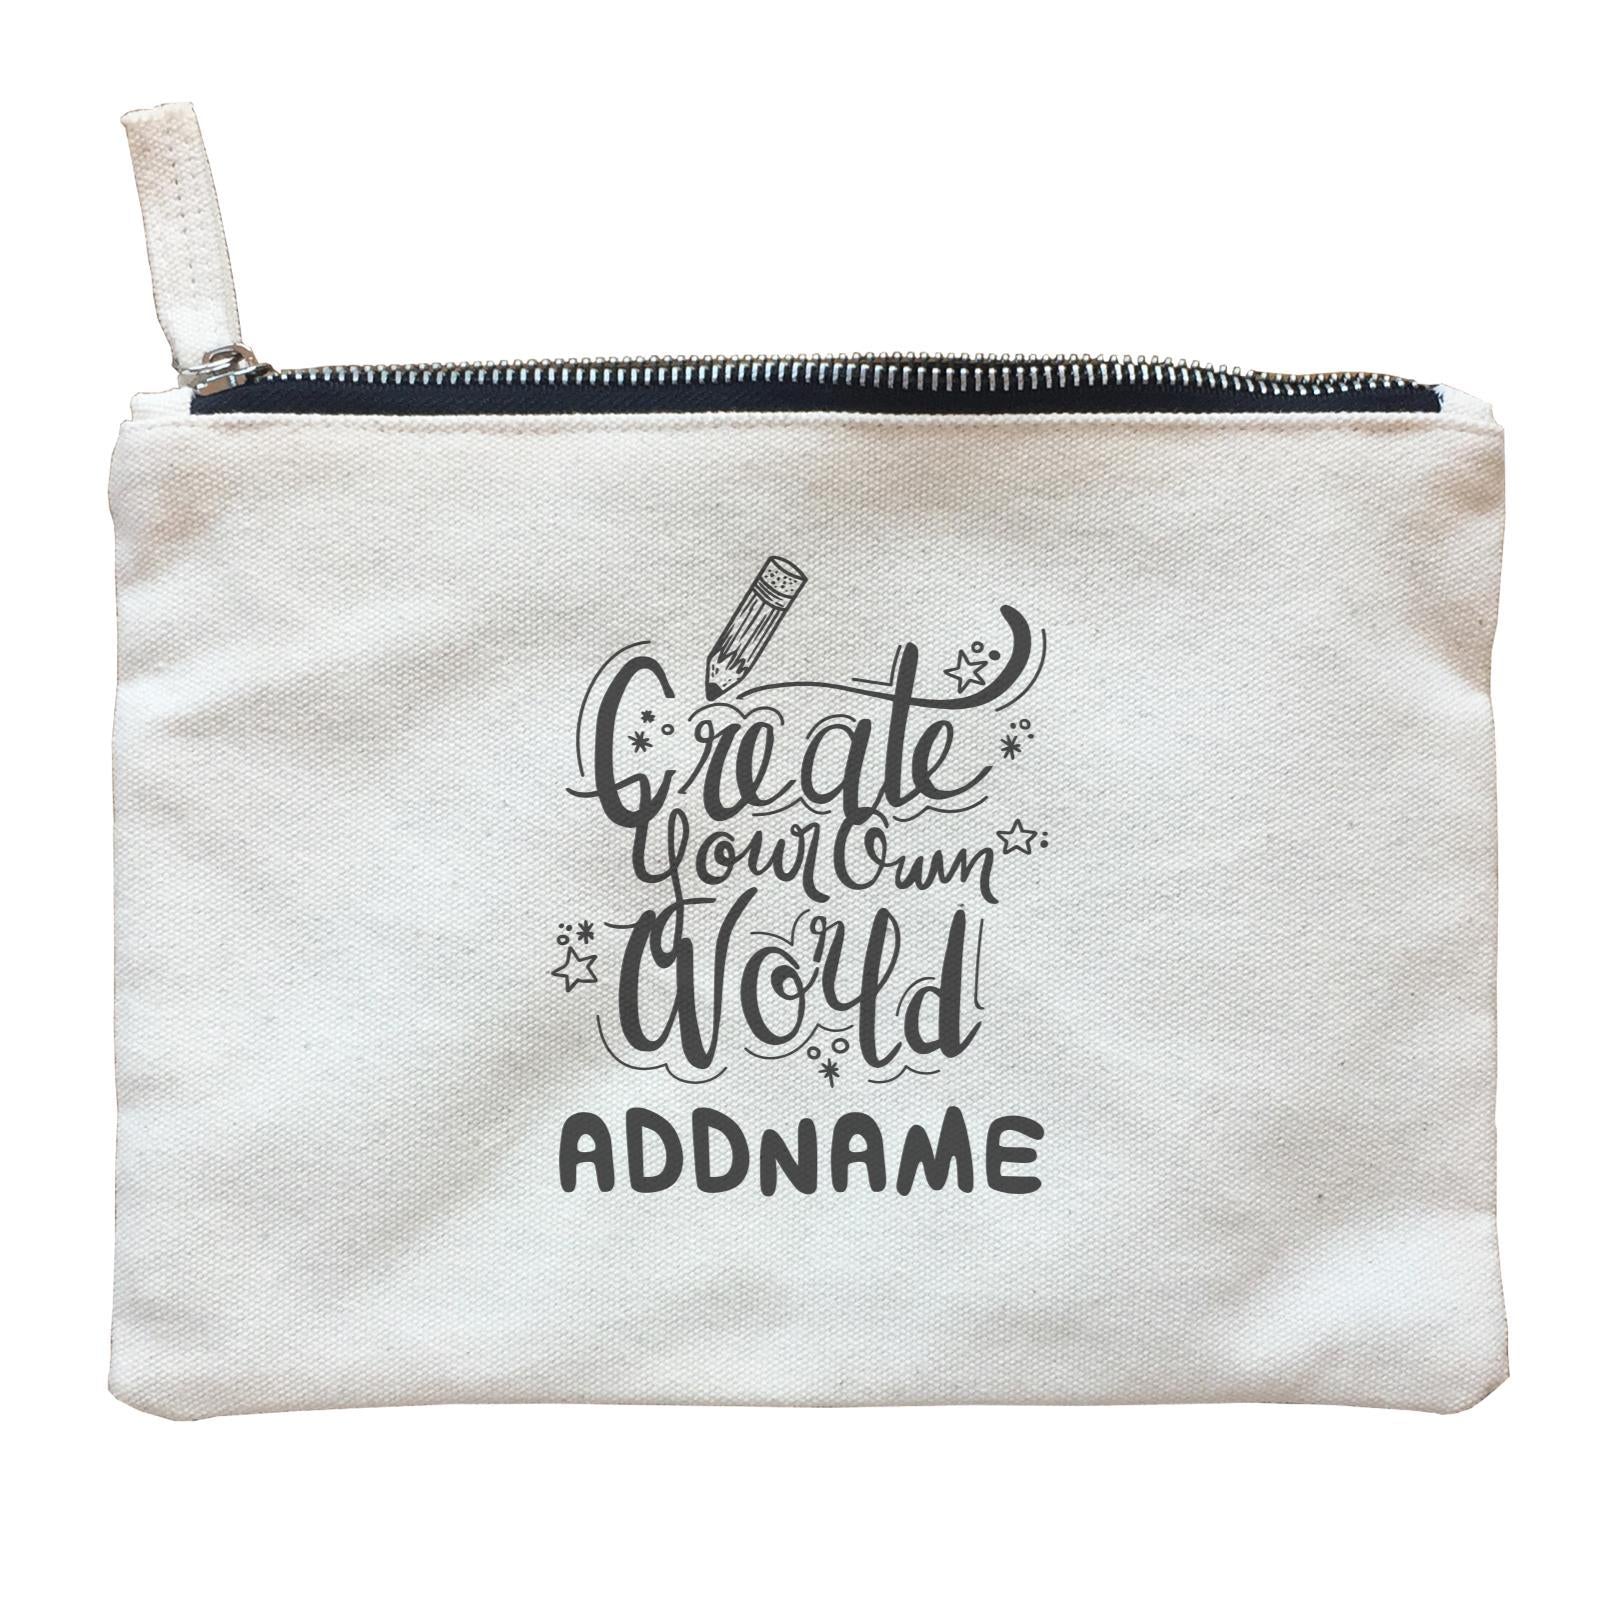 Children's Day Gift Series Create Your Own World Addname  Zipper Pouch